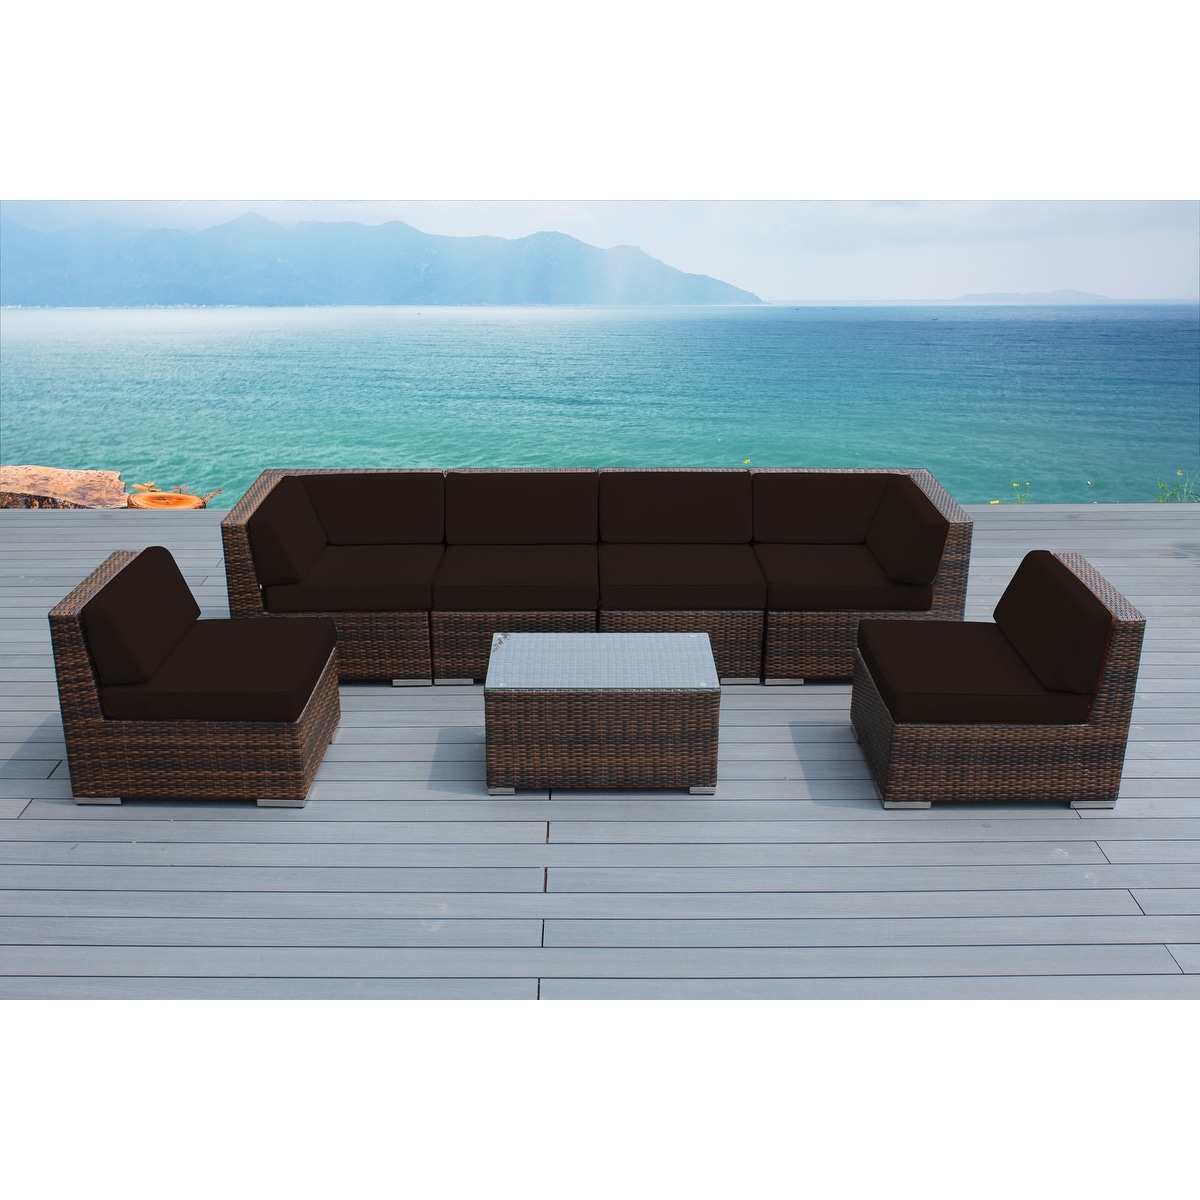 Ohana Outdoor Patio 7 Piece Mixed Brown Wicker Sectional With Cushions - No Assembly